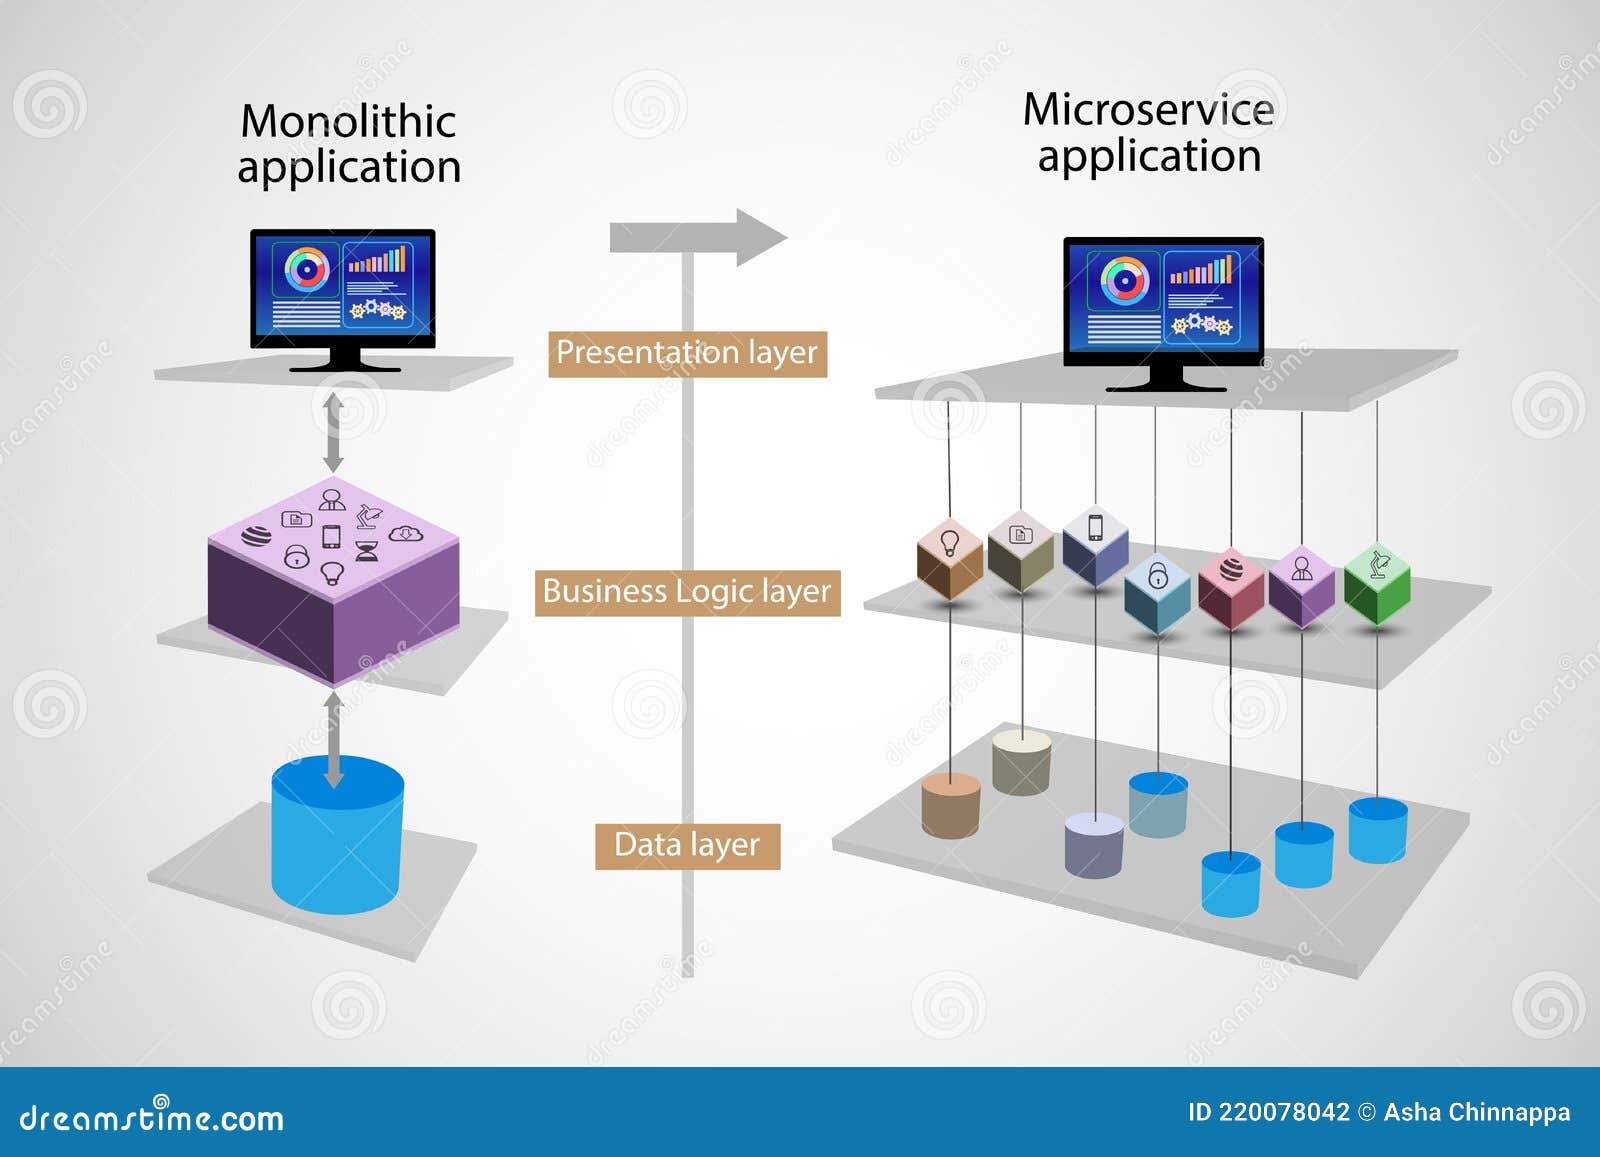 concept of monolithic and microservice layered architecture